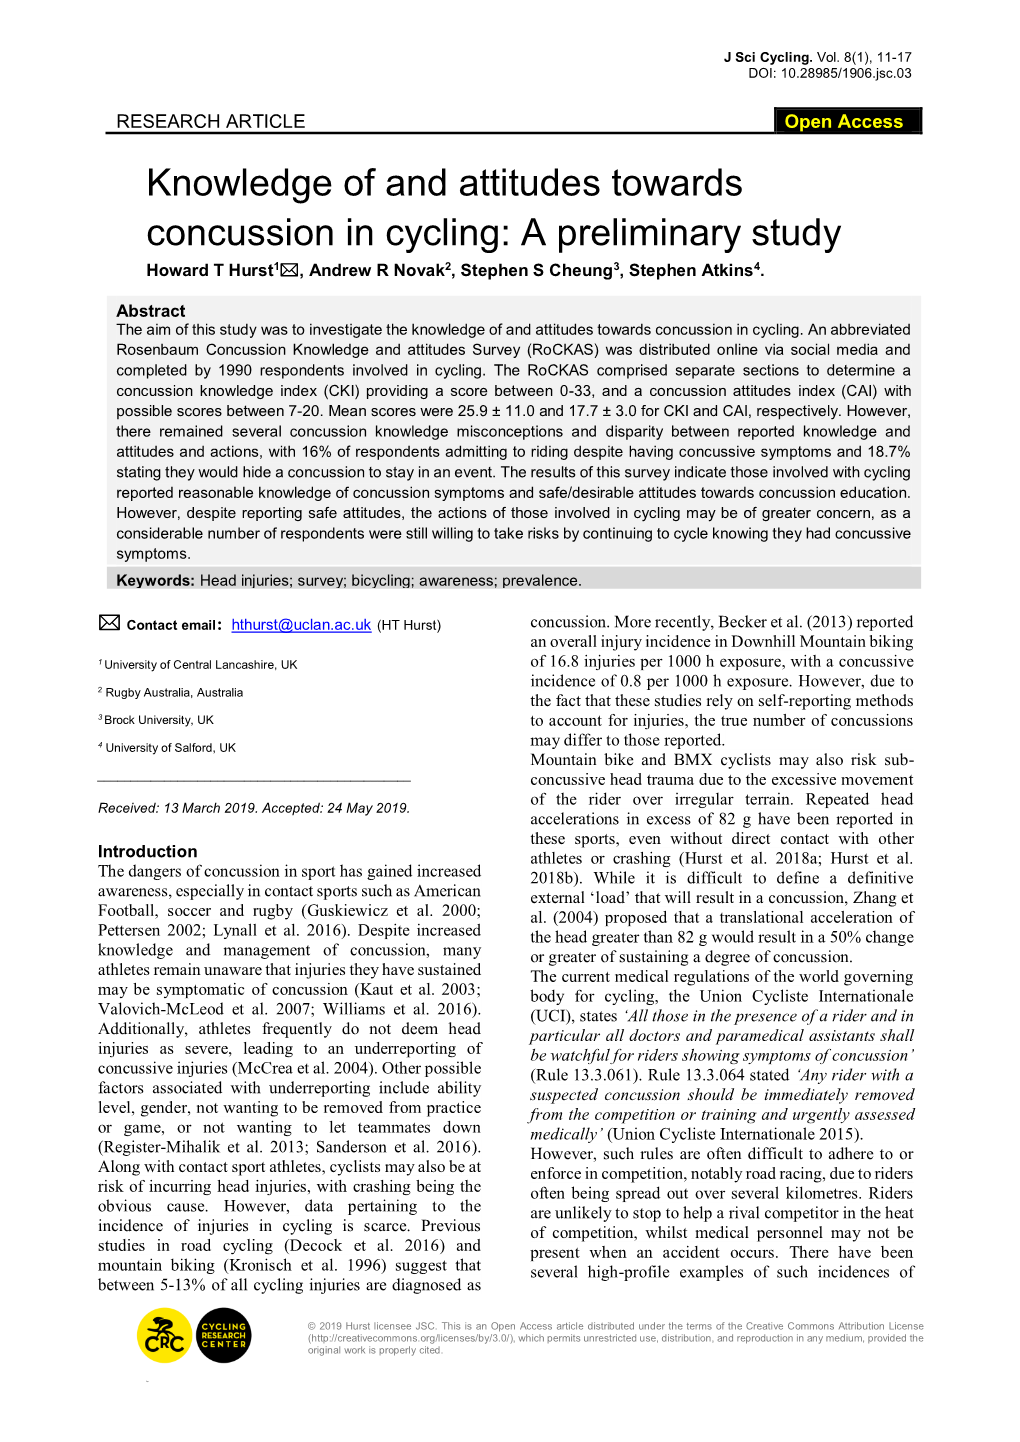 Knowledge of and Attitudes Towards Concussion in Cycling: a Preliminary Study Howard T Hurst1, Andrew R Novak2, Stephen S Cheung3, Stephen Atkins4